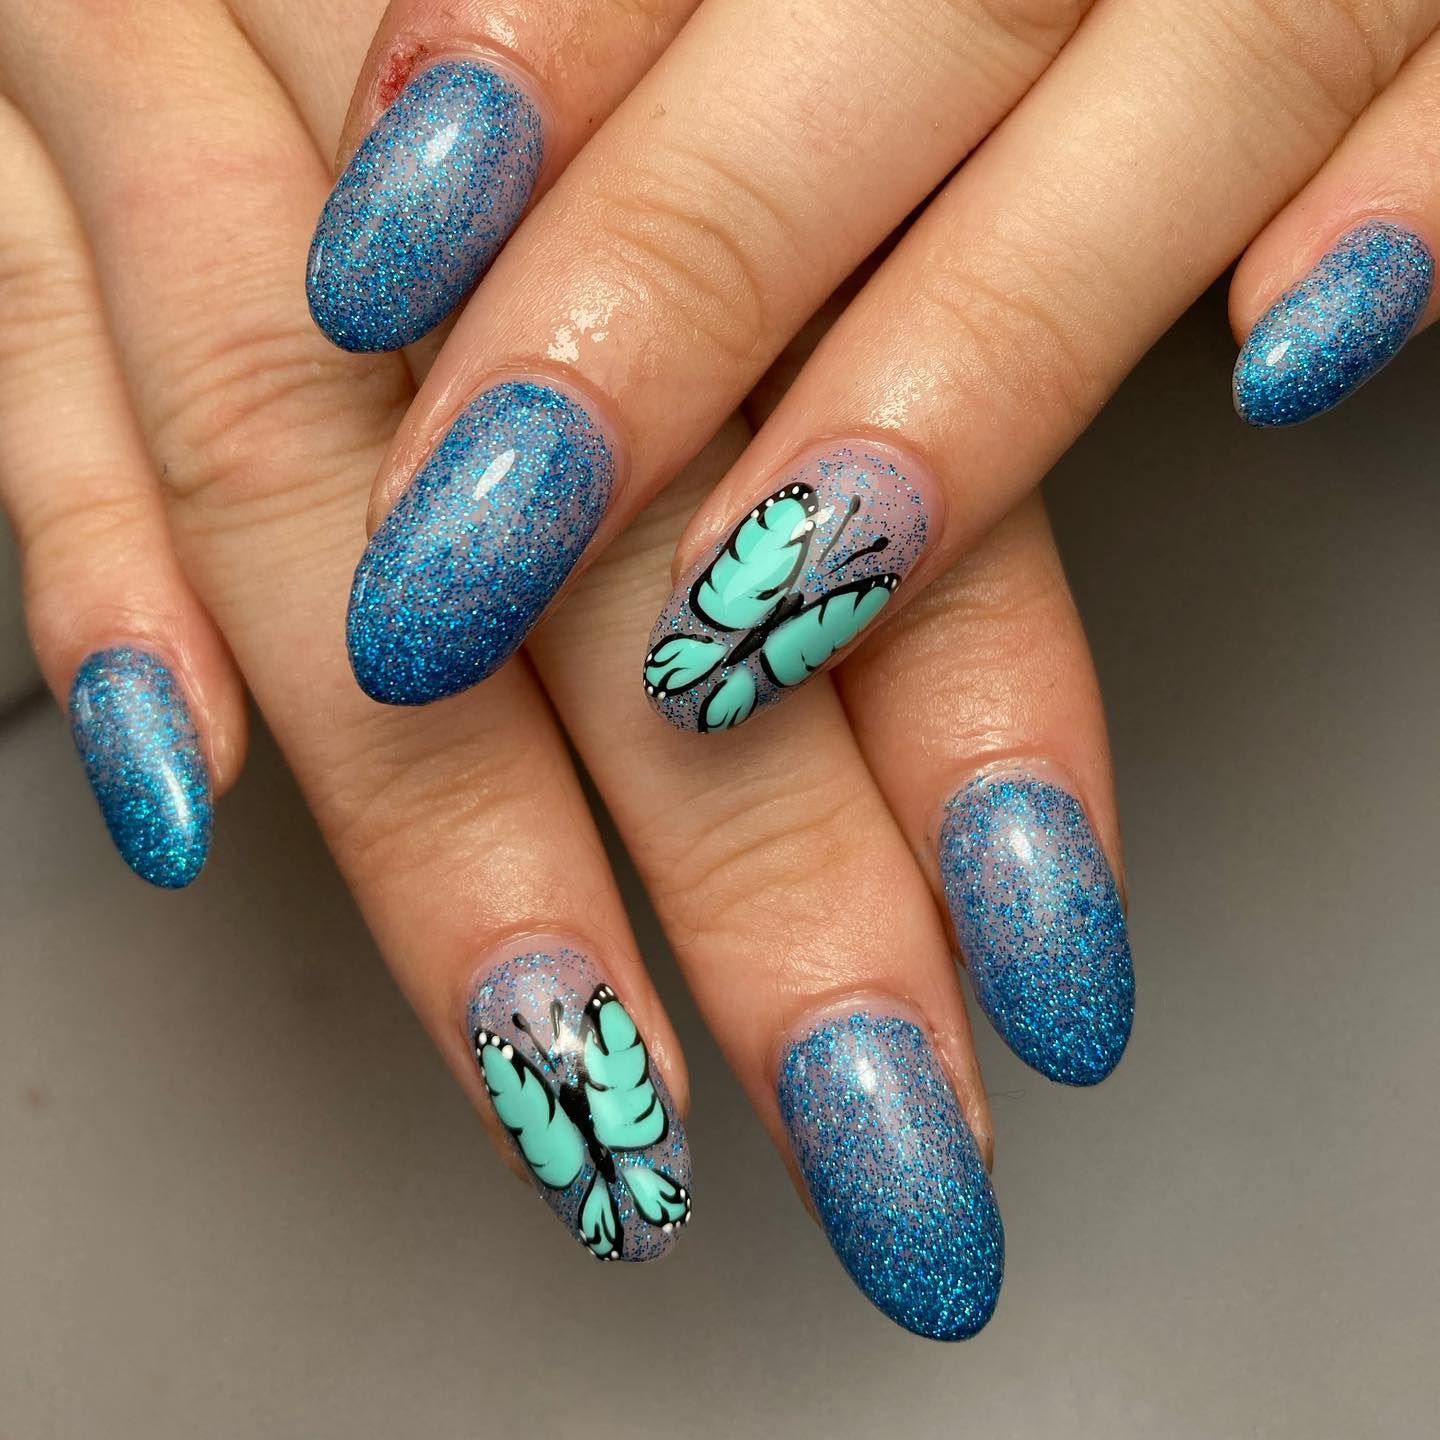 It is amazing to see how well blue and green colors go with together. On top of glittered blue nails, it is a great idea to create green butterflies.